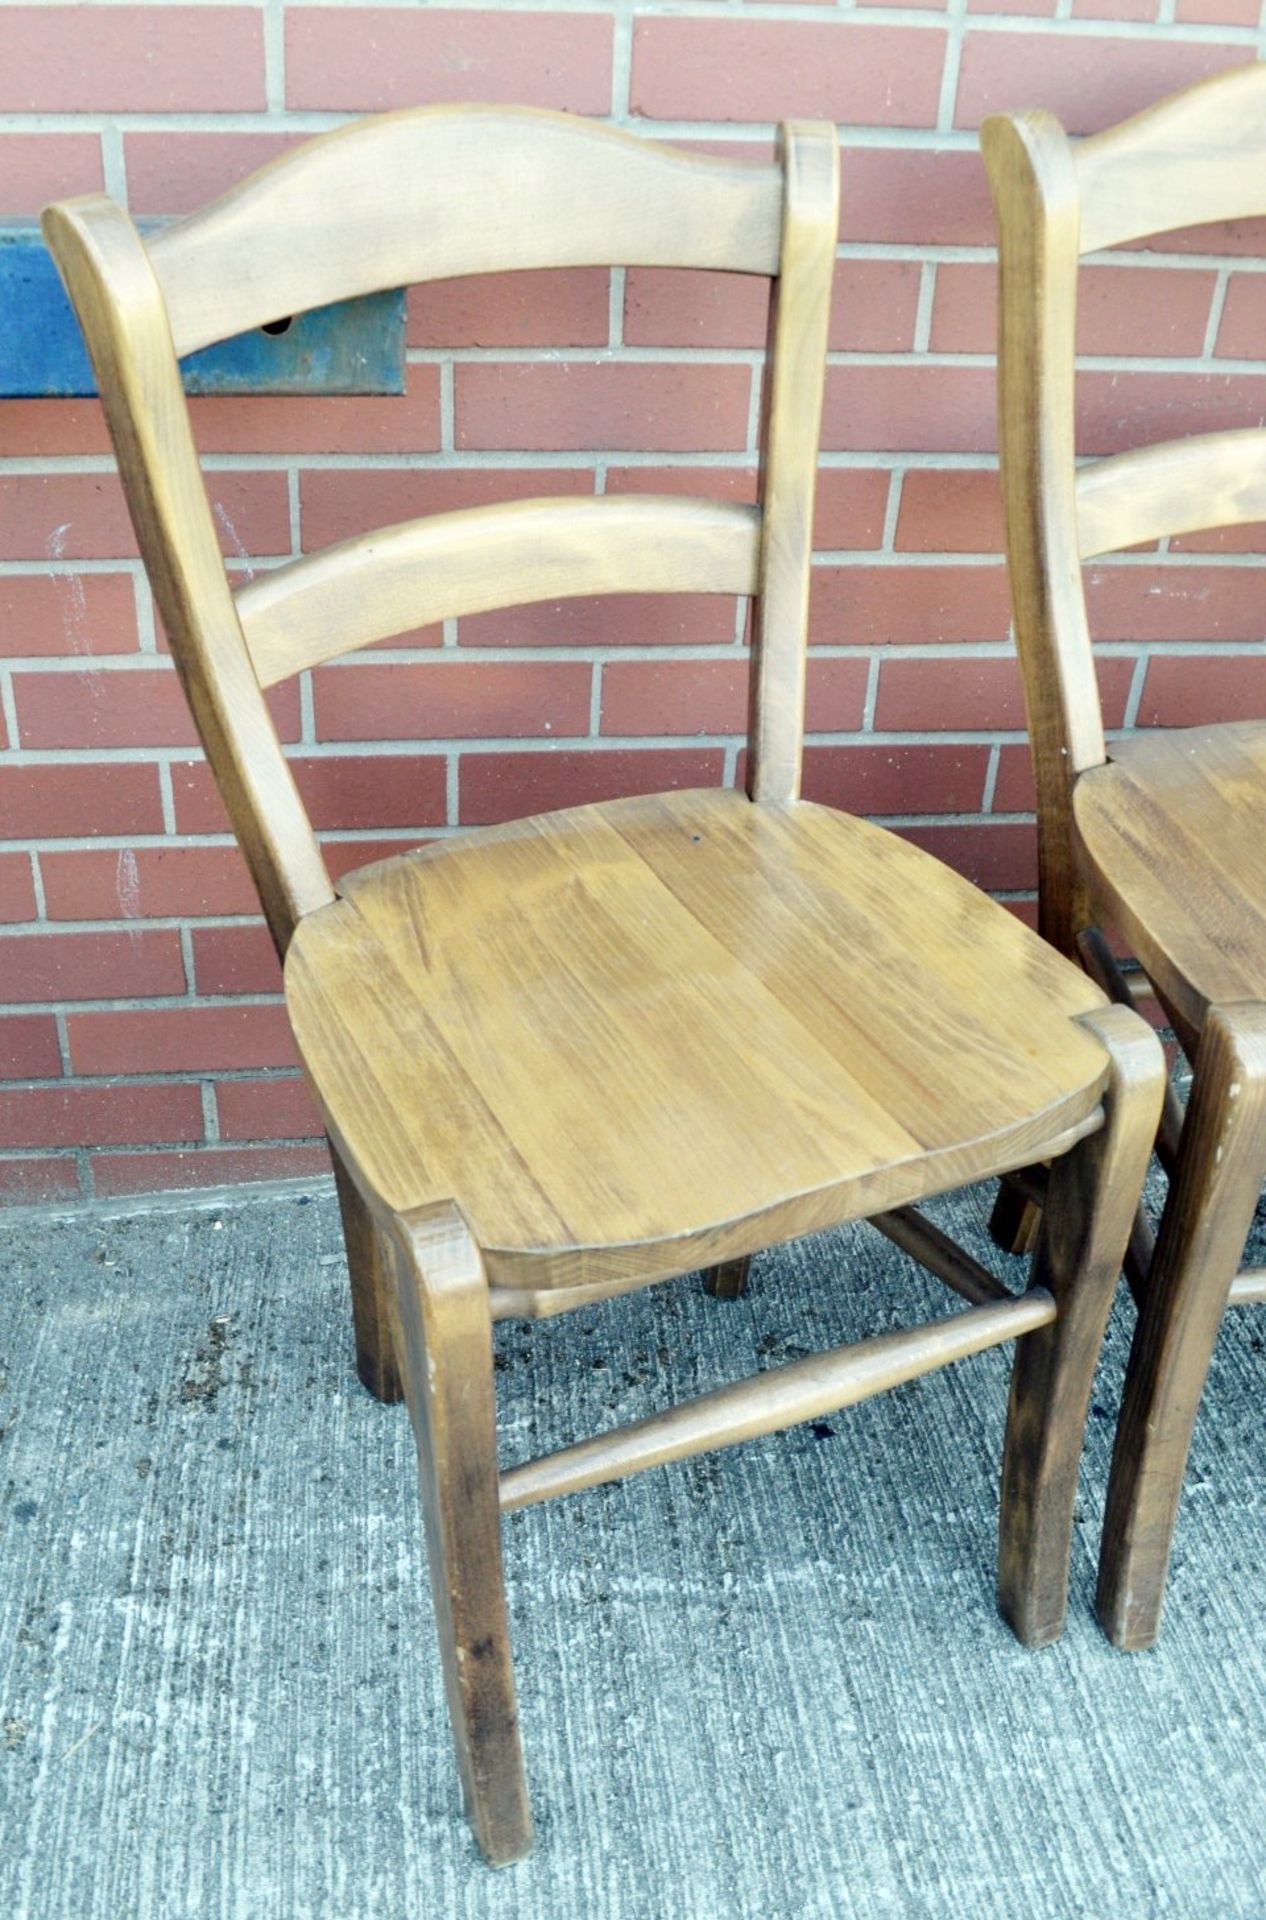 3 x Matching Sturdy Solid Wood Chairs With An Attractive Varnished Finish - Dimensions: H90 x W47 - Image 5 of 7